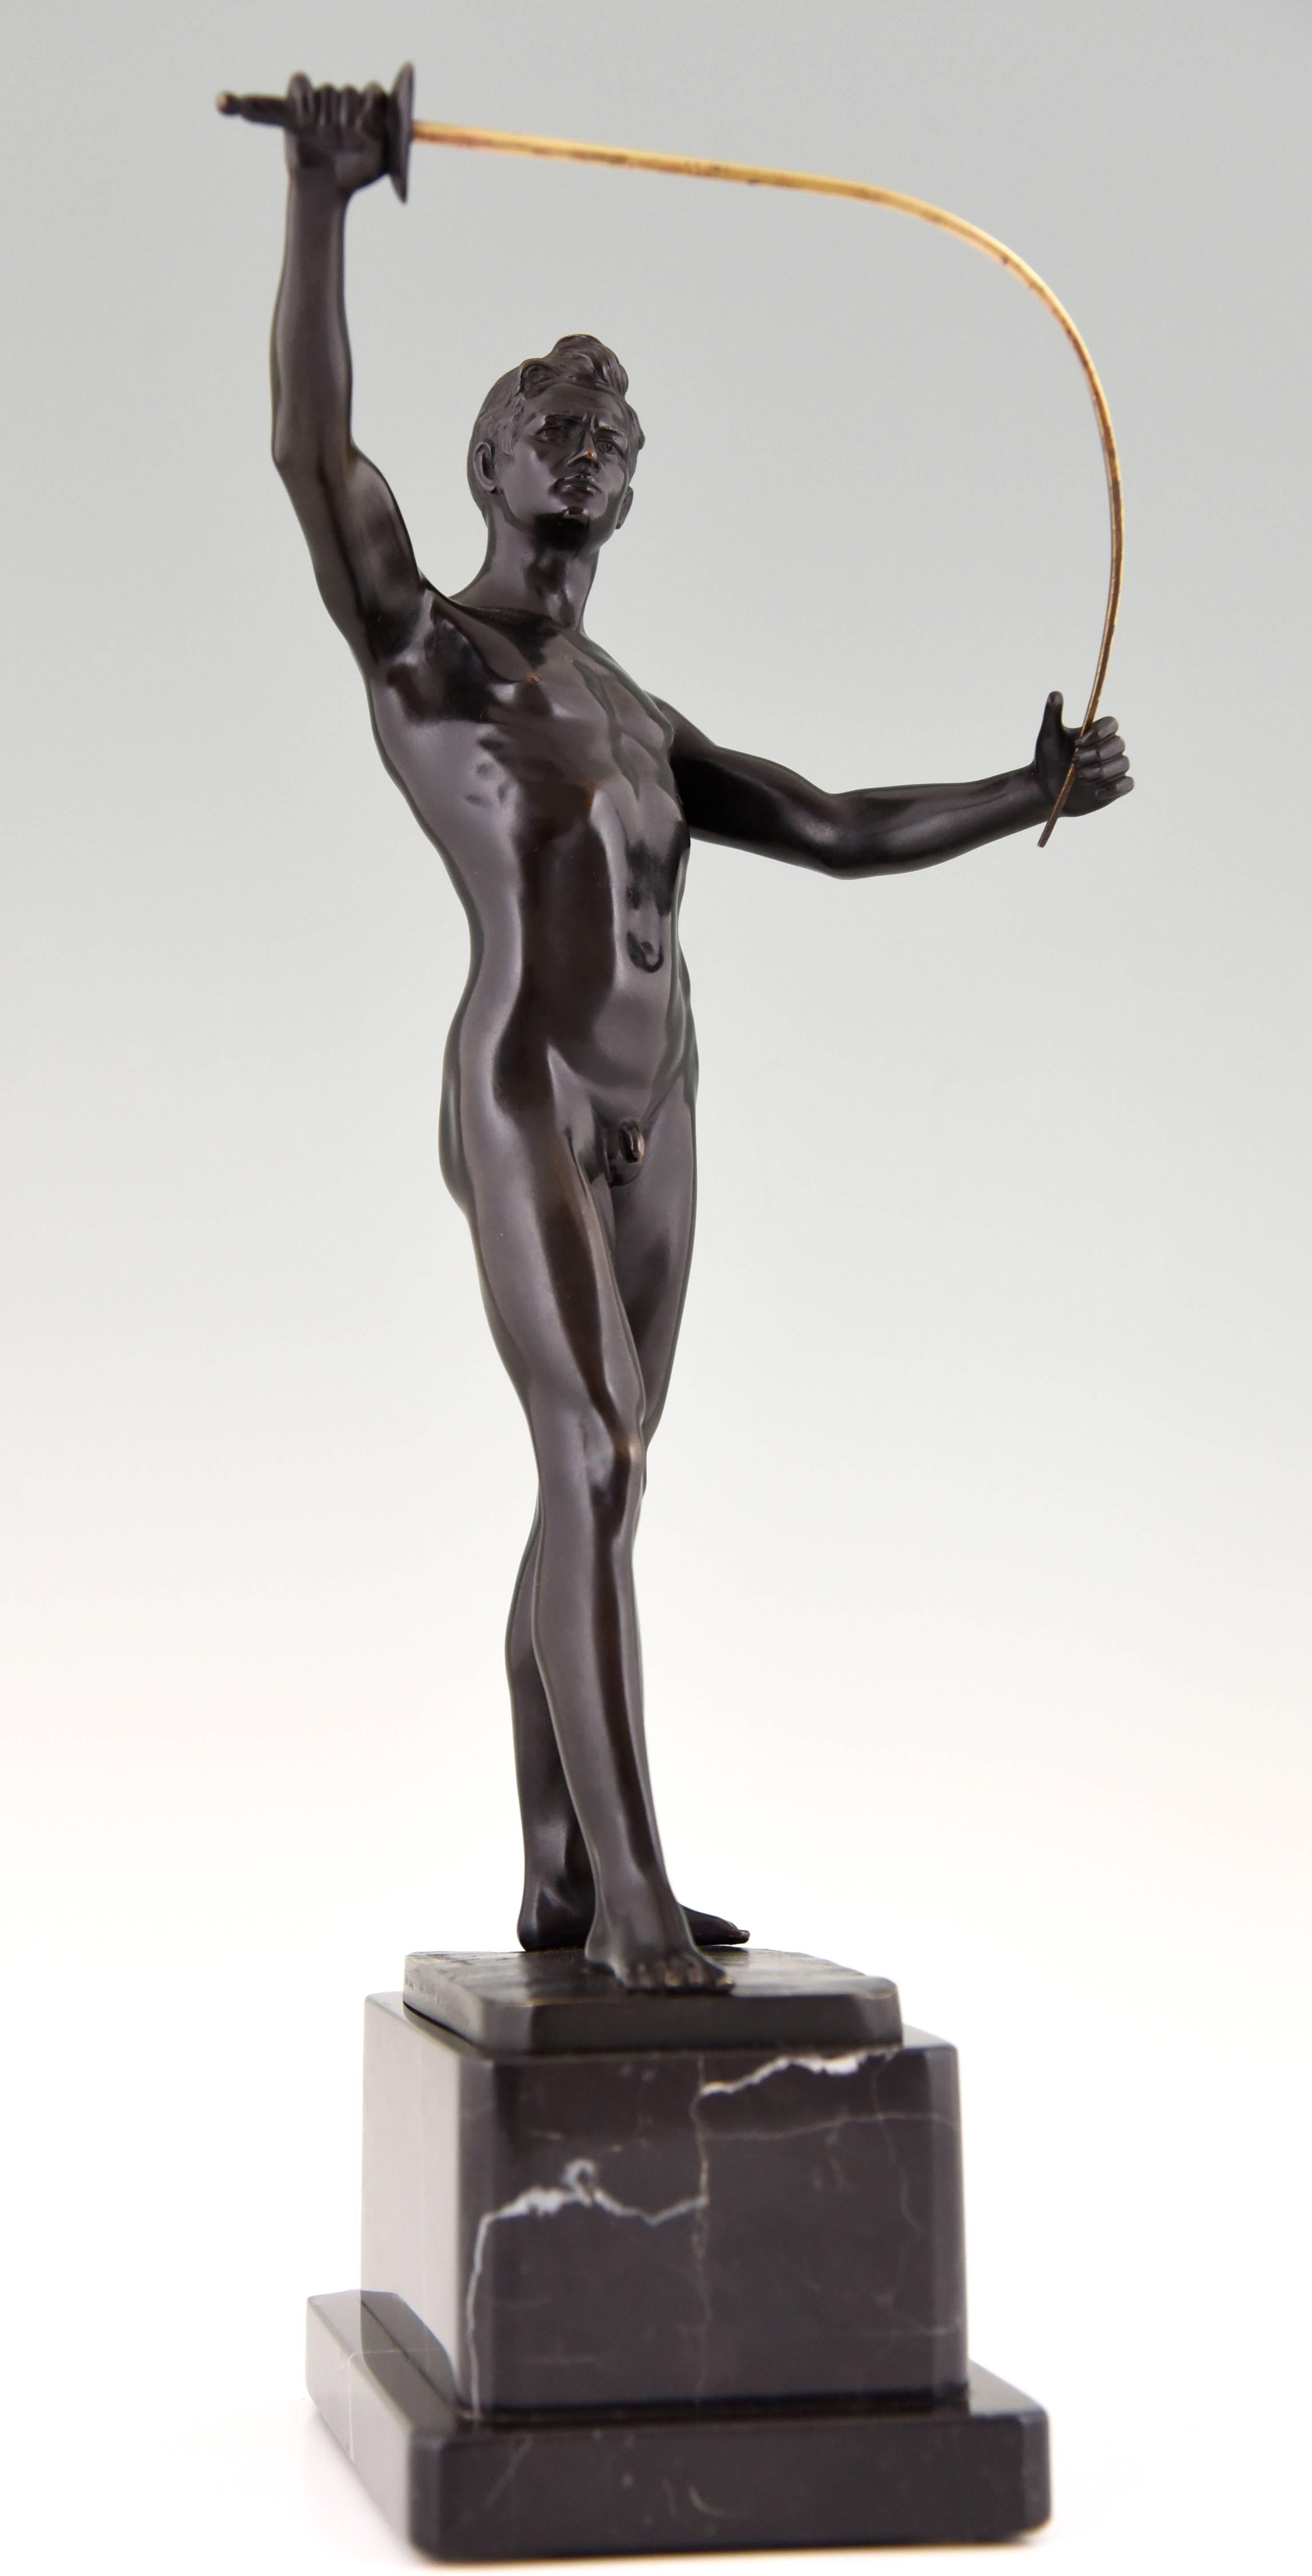 Art Deco sculpture of a standing male nude fencer holding and flexing an épée, on marble plinth. 

Artist/Maker: Auguste Durin
Signature/Marks: Auguste Durin.
Style: Art Deco
Date: 1920
Material: Patinated bronze. Marble base.
Origin: